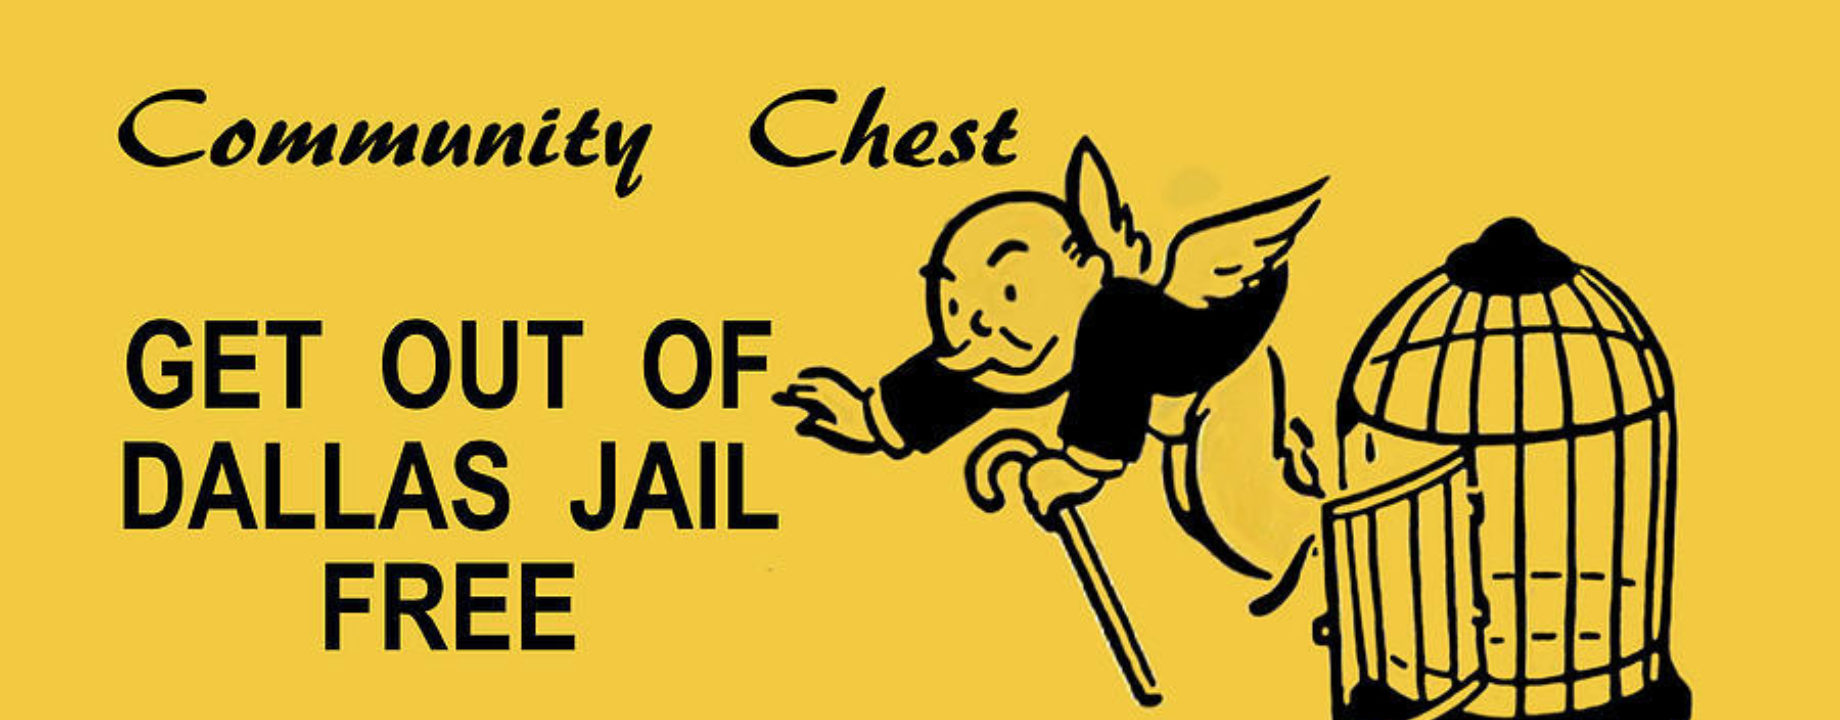 Monopoly get out of dallas jail free jas stem